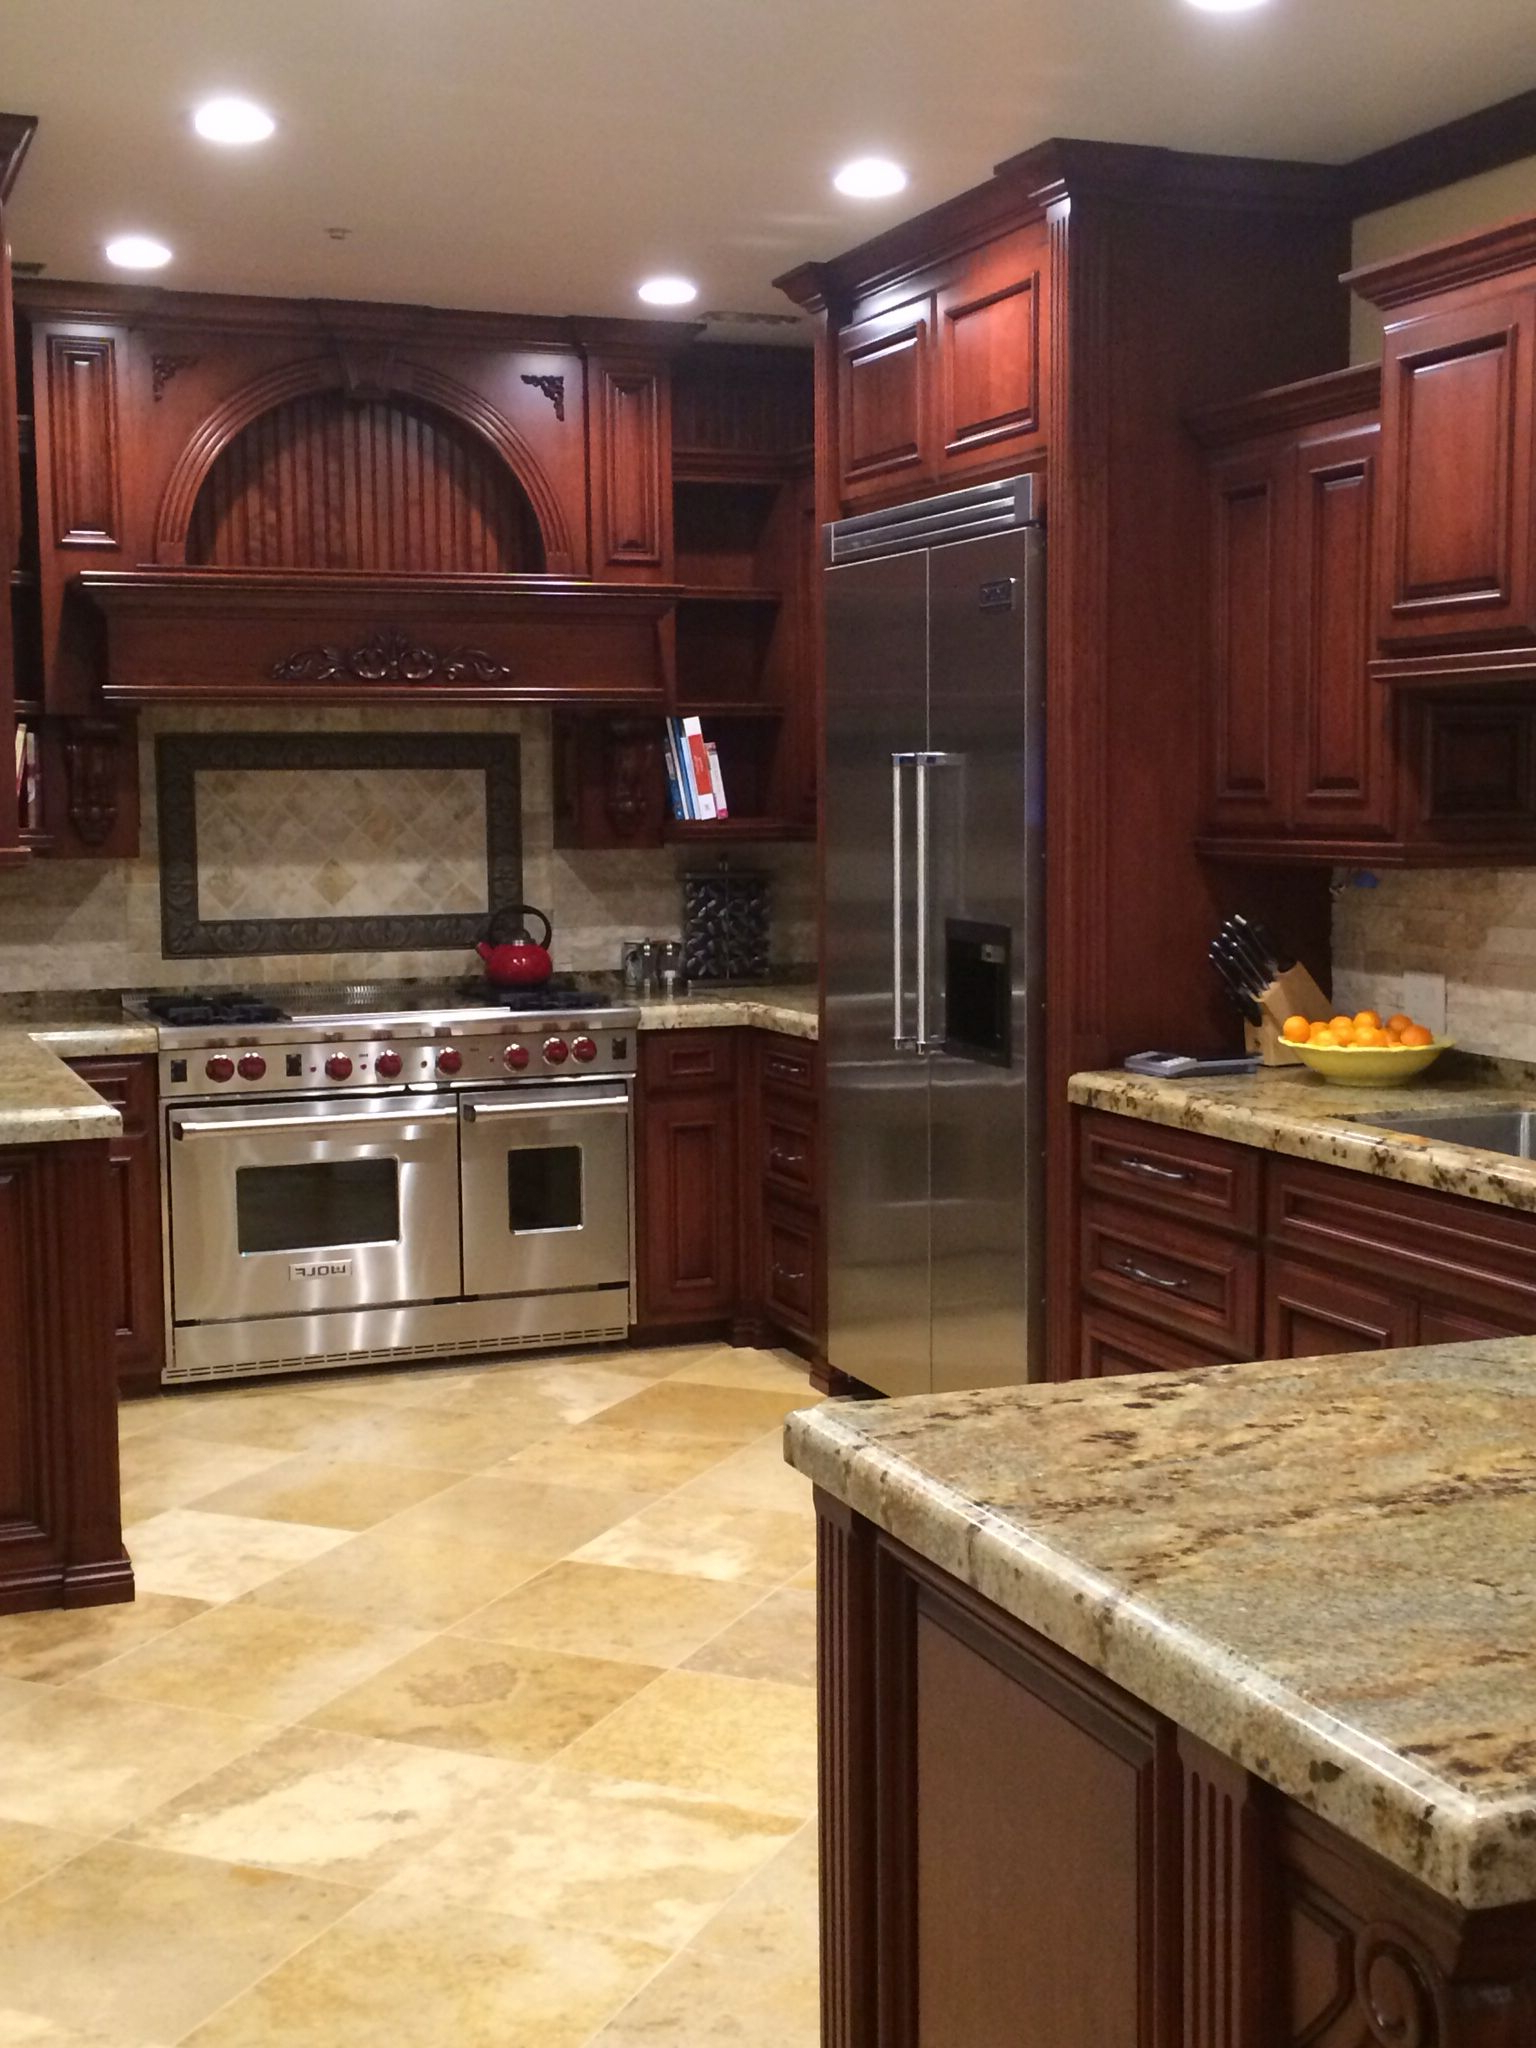 Beautiful Kitchen Cabinet Color Especially Coupled With The Light Colored What Looks Like